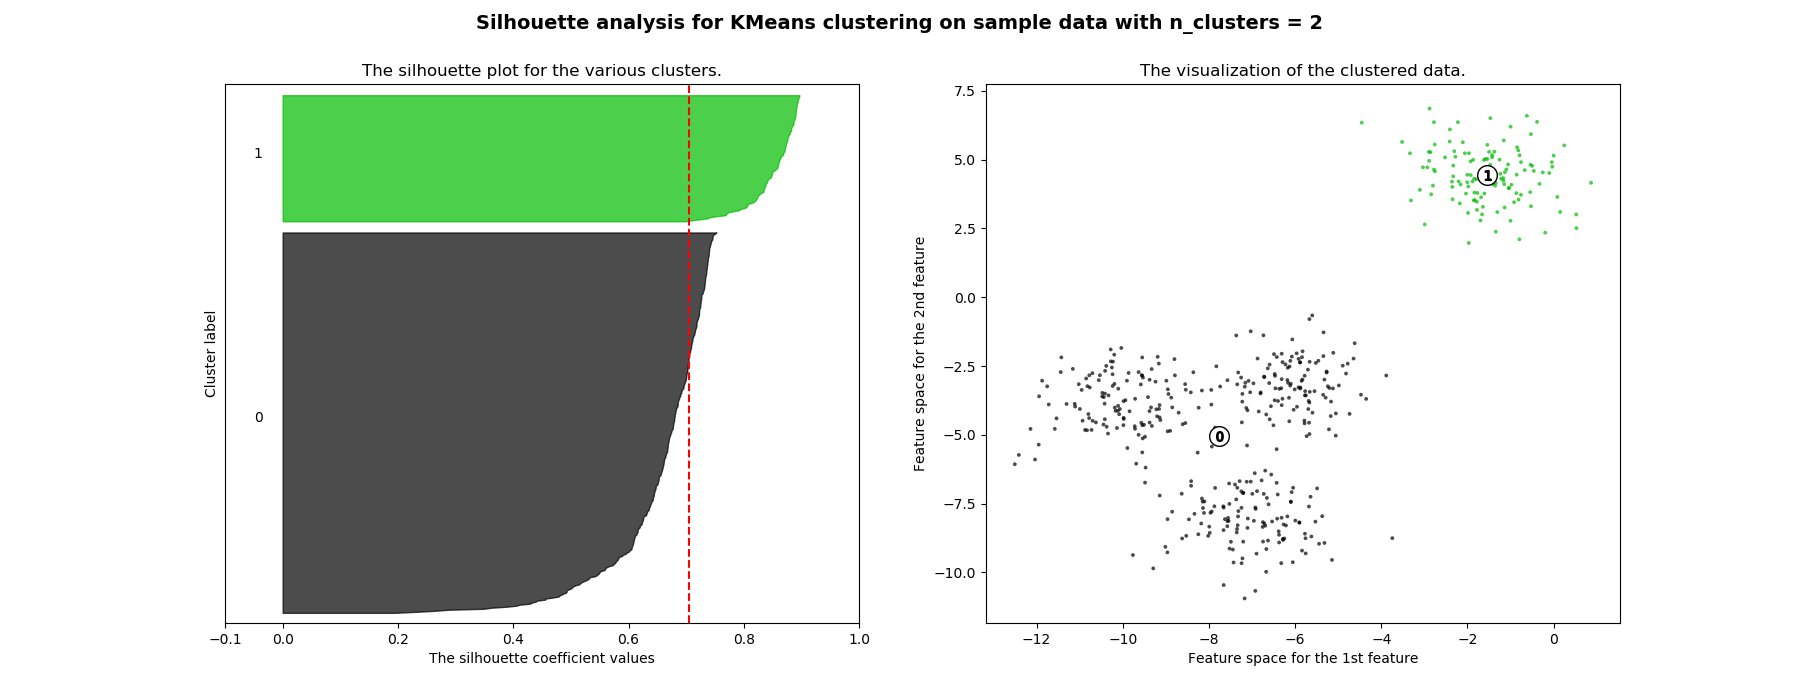 ../../_images/sphx_glr_plot_kmeans_silhouette_analysis_001.png